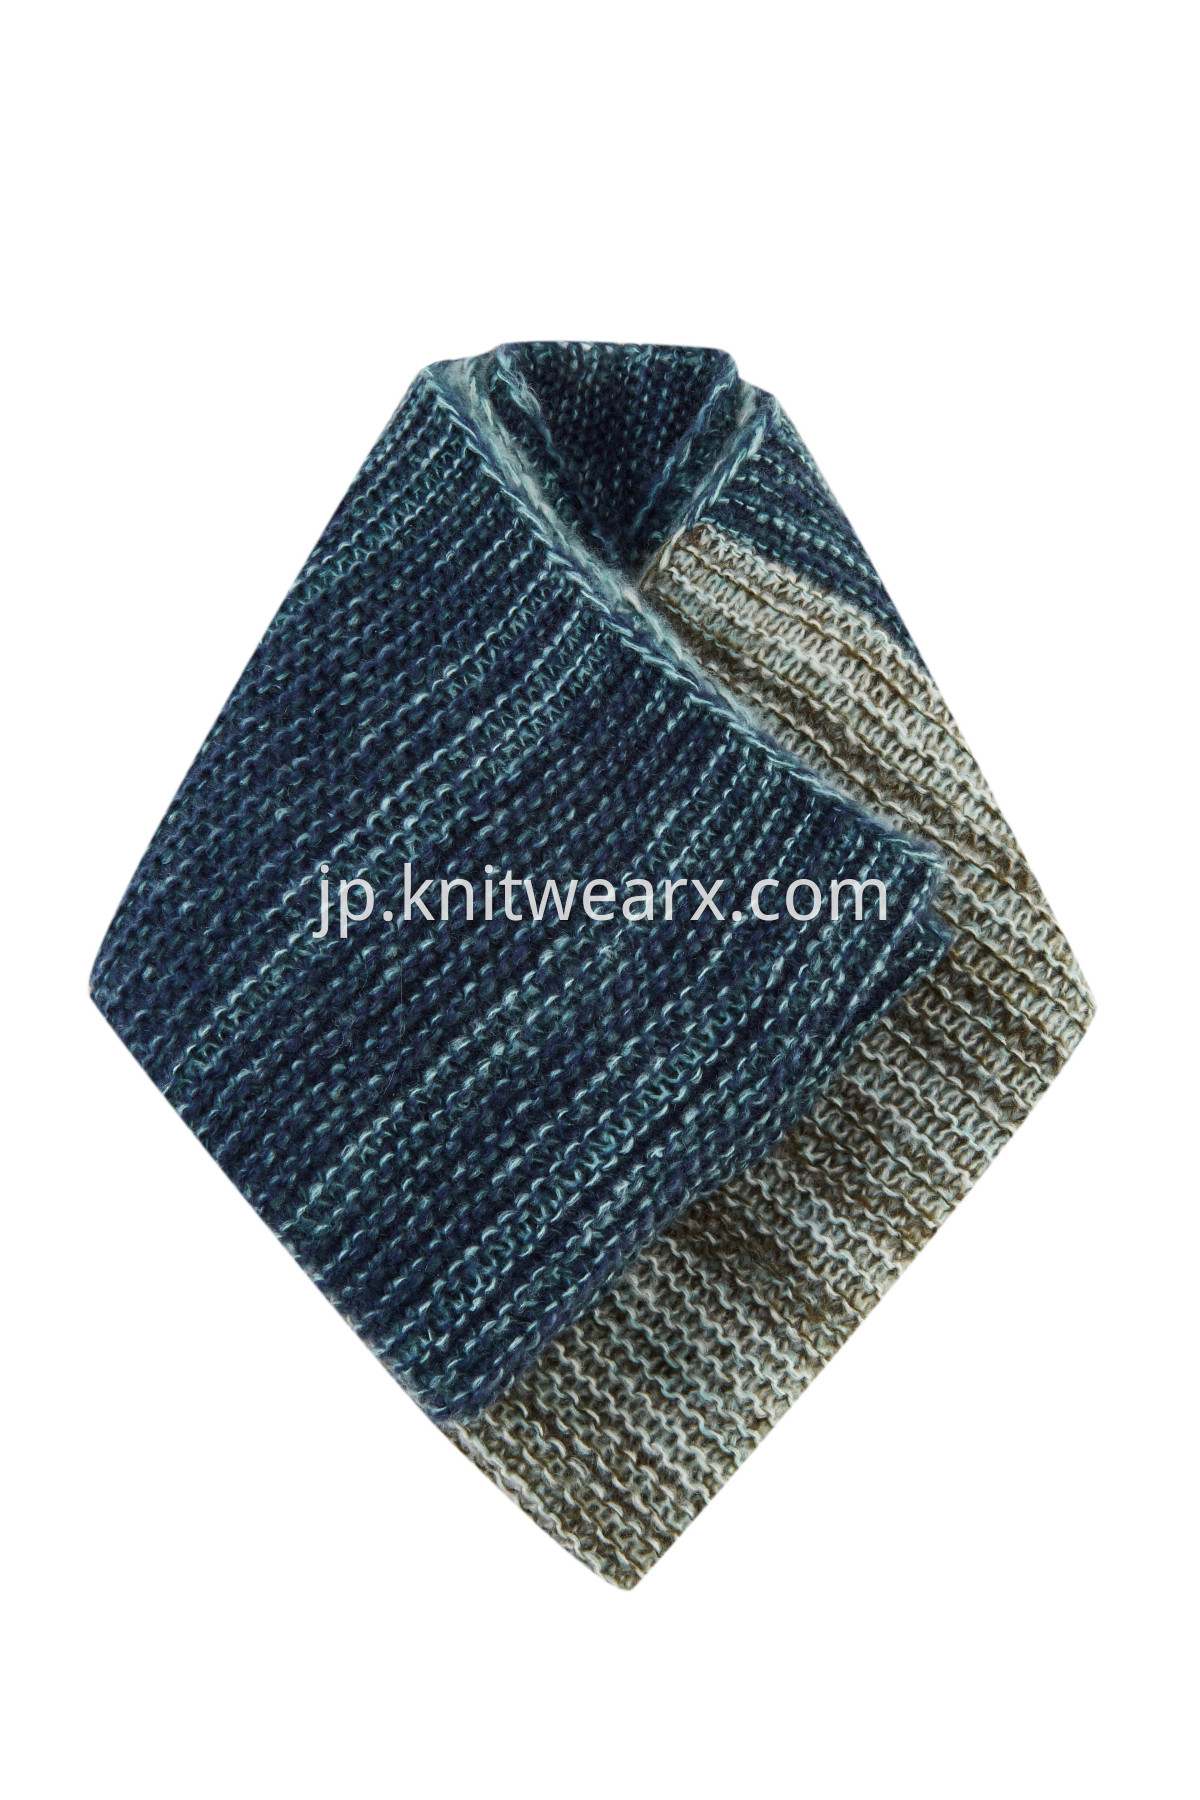 Women's Winter Scarf Wrapables Knitted Warm Soft Neck